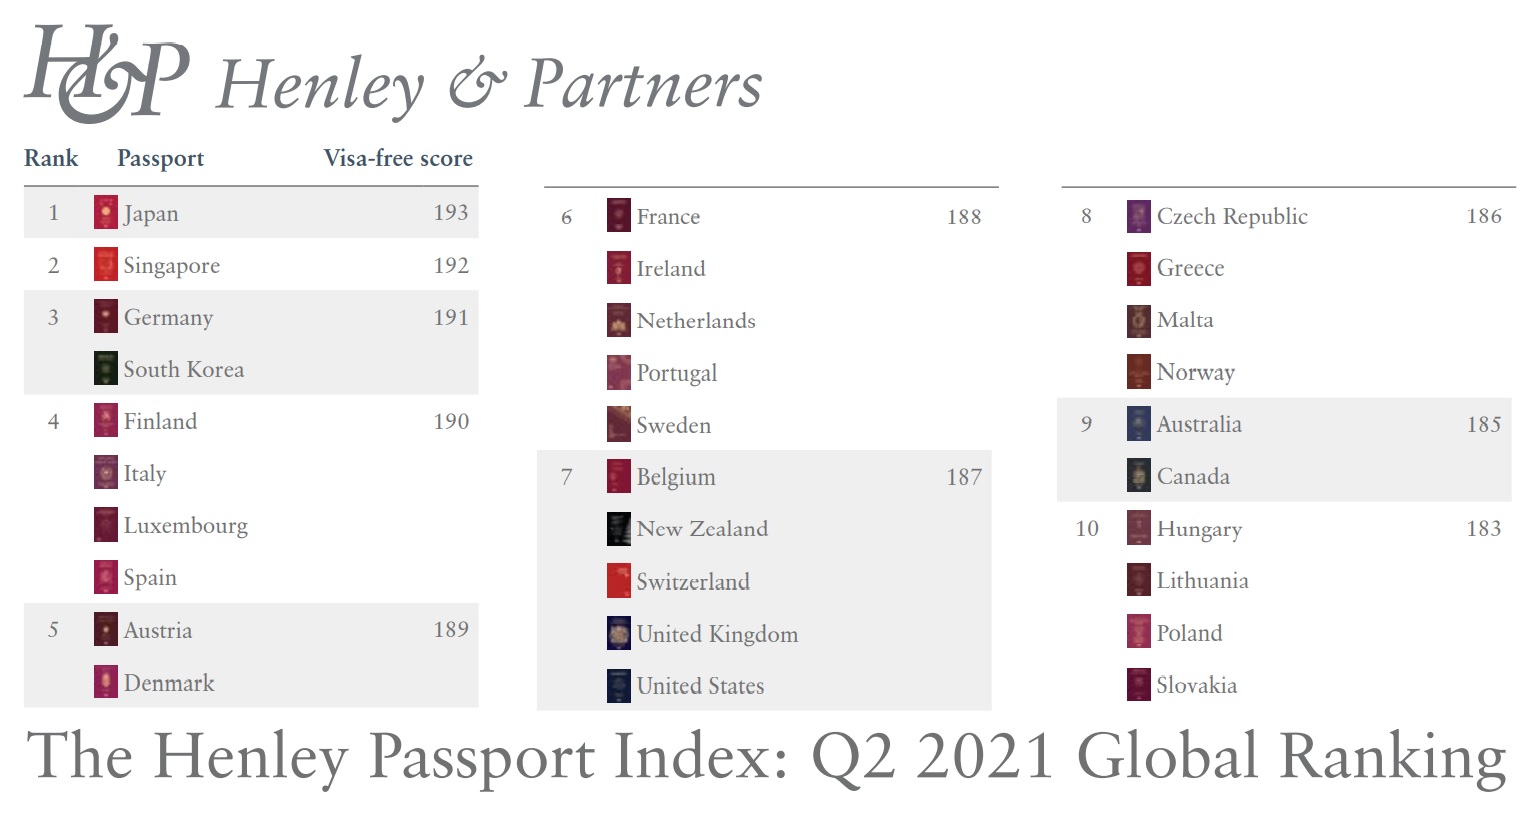 Japan firmly holds onto the number one spot on the index, with Japanese passport holders theoretically able to access a record 193 destinations around the world visa-free. Singapore remains in 2nd place, with a visa-free/visa-on-arrival score of 192, while Germany and South Korea again share joint-3rd place, each with access to 191 destinations. Click to enlarge.